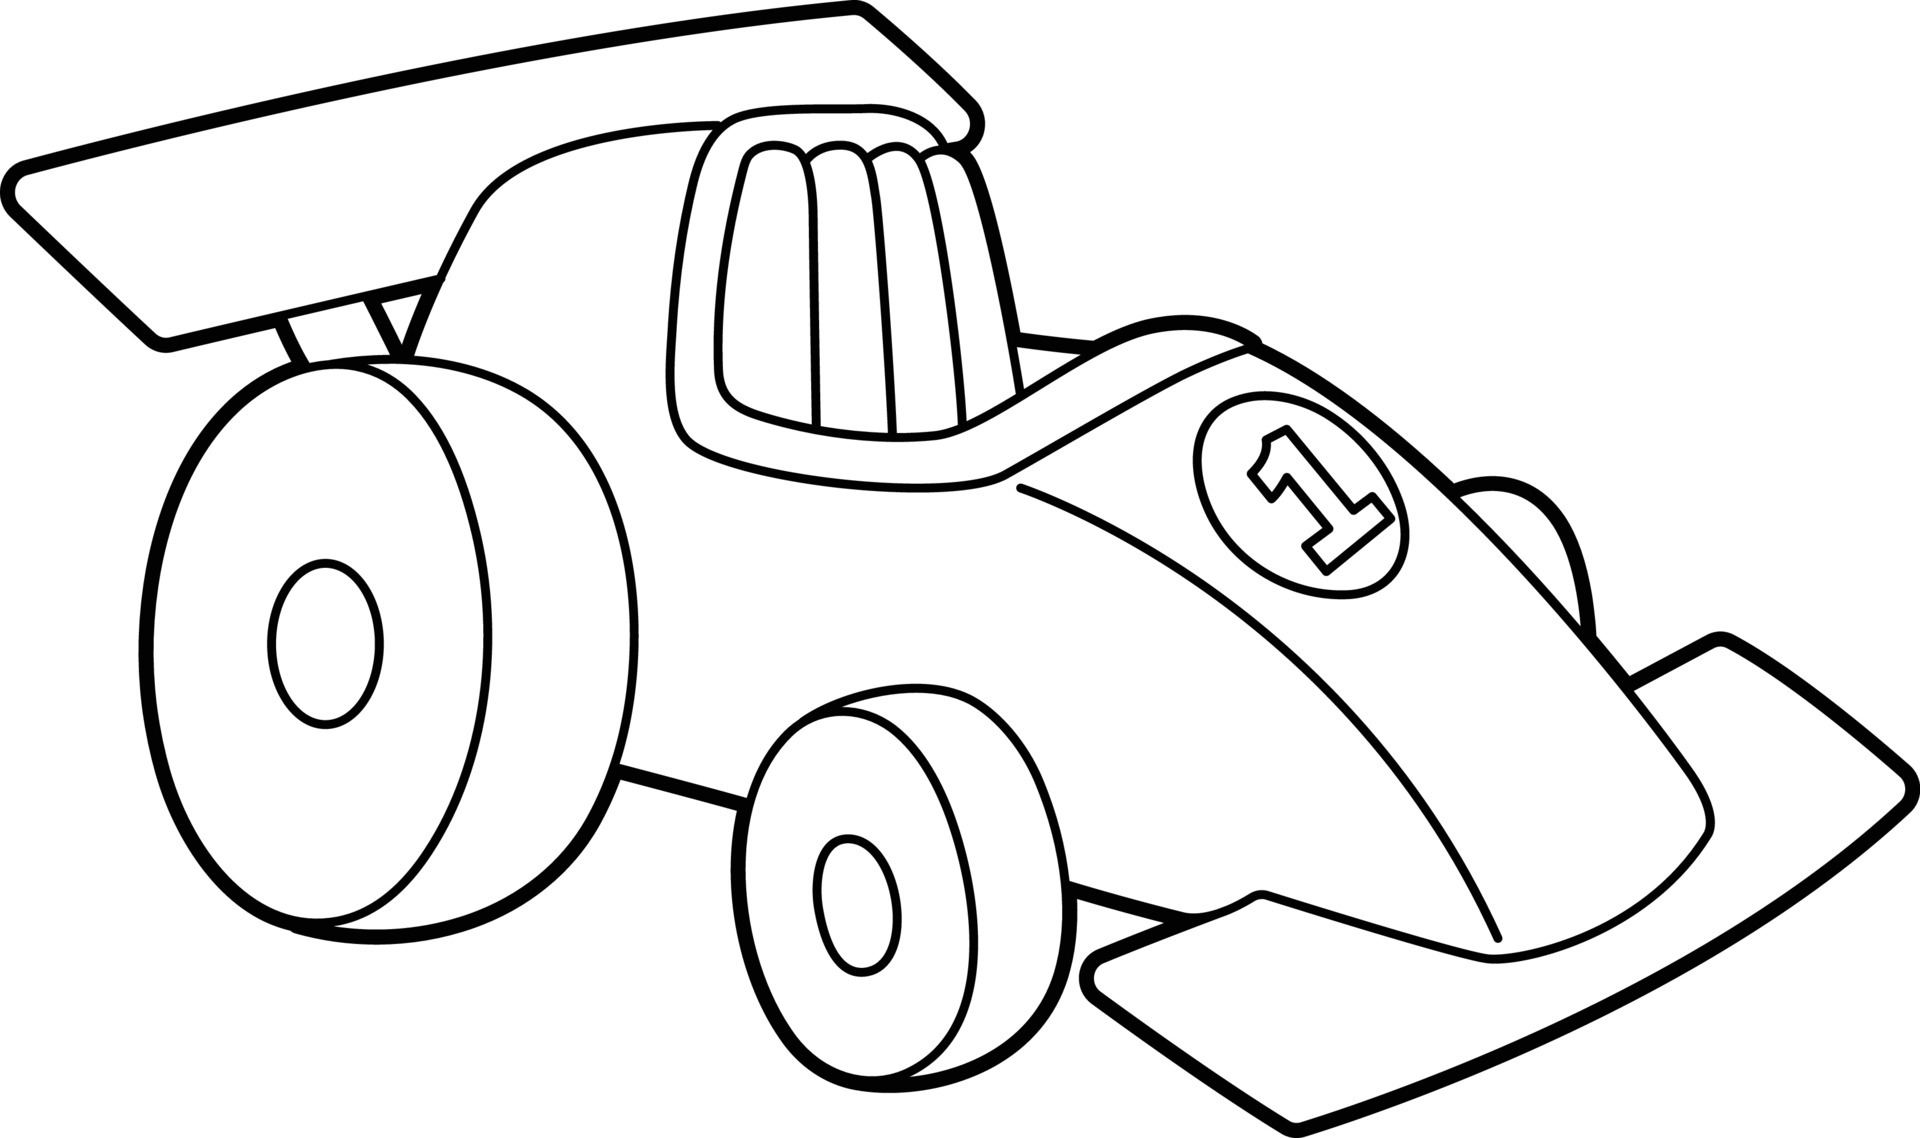 Sports car Drawing Ferrari Coloring book Cars Coloring Pages compact Car  child vintage Car png  PNGWing